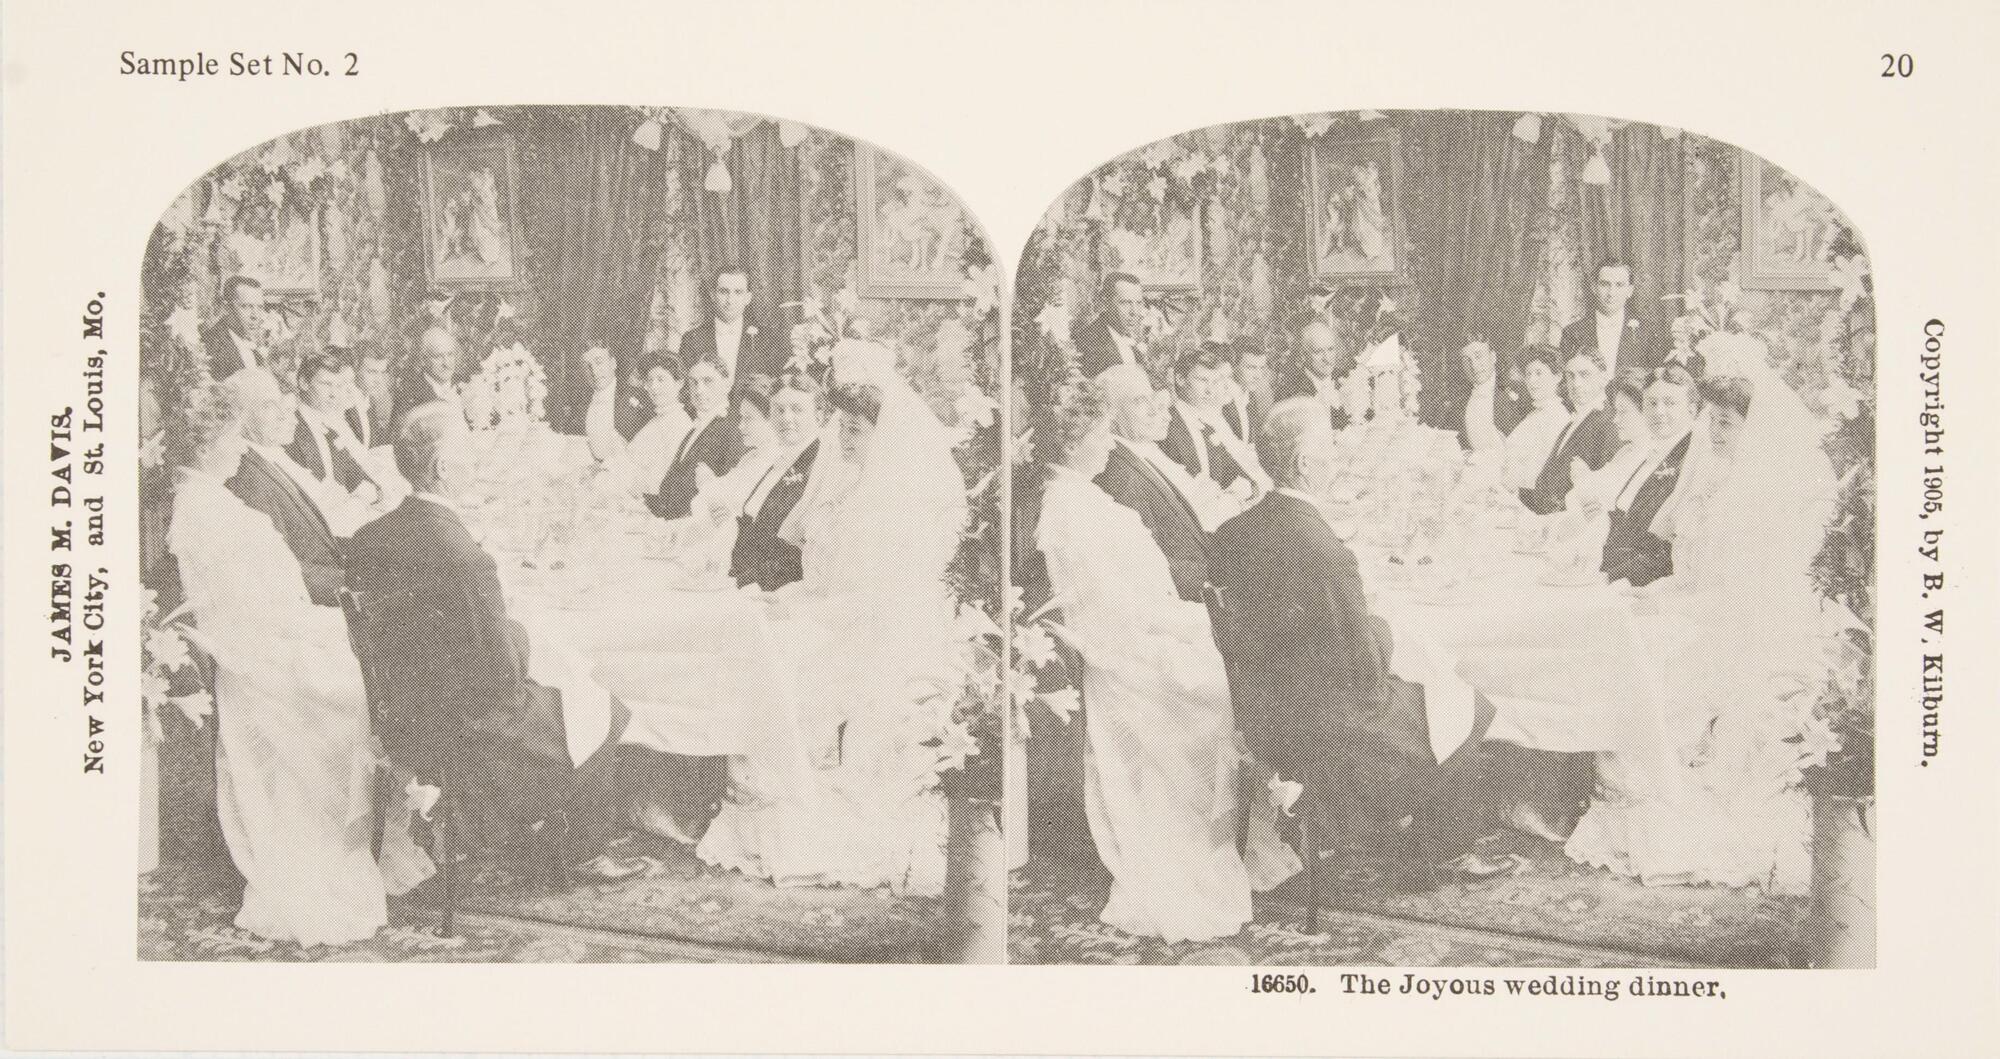 This black and white stereoscopic image features two images of a wedding party sitting together at a long table covered with a white table cloth. The bride is sitting at the very end of the table on the right hand side of the picture. The walls have floral wallpaper and dark curtains.